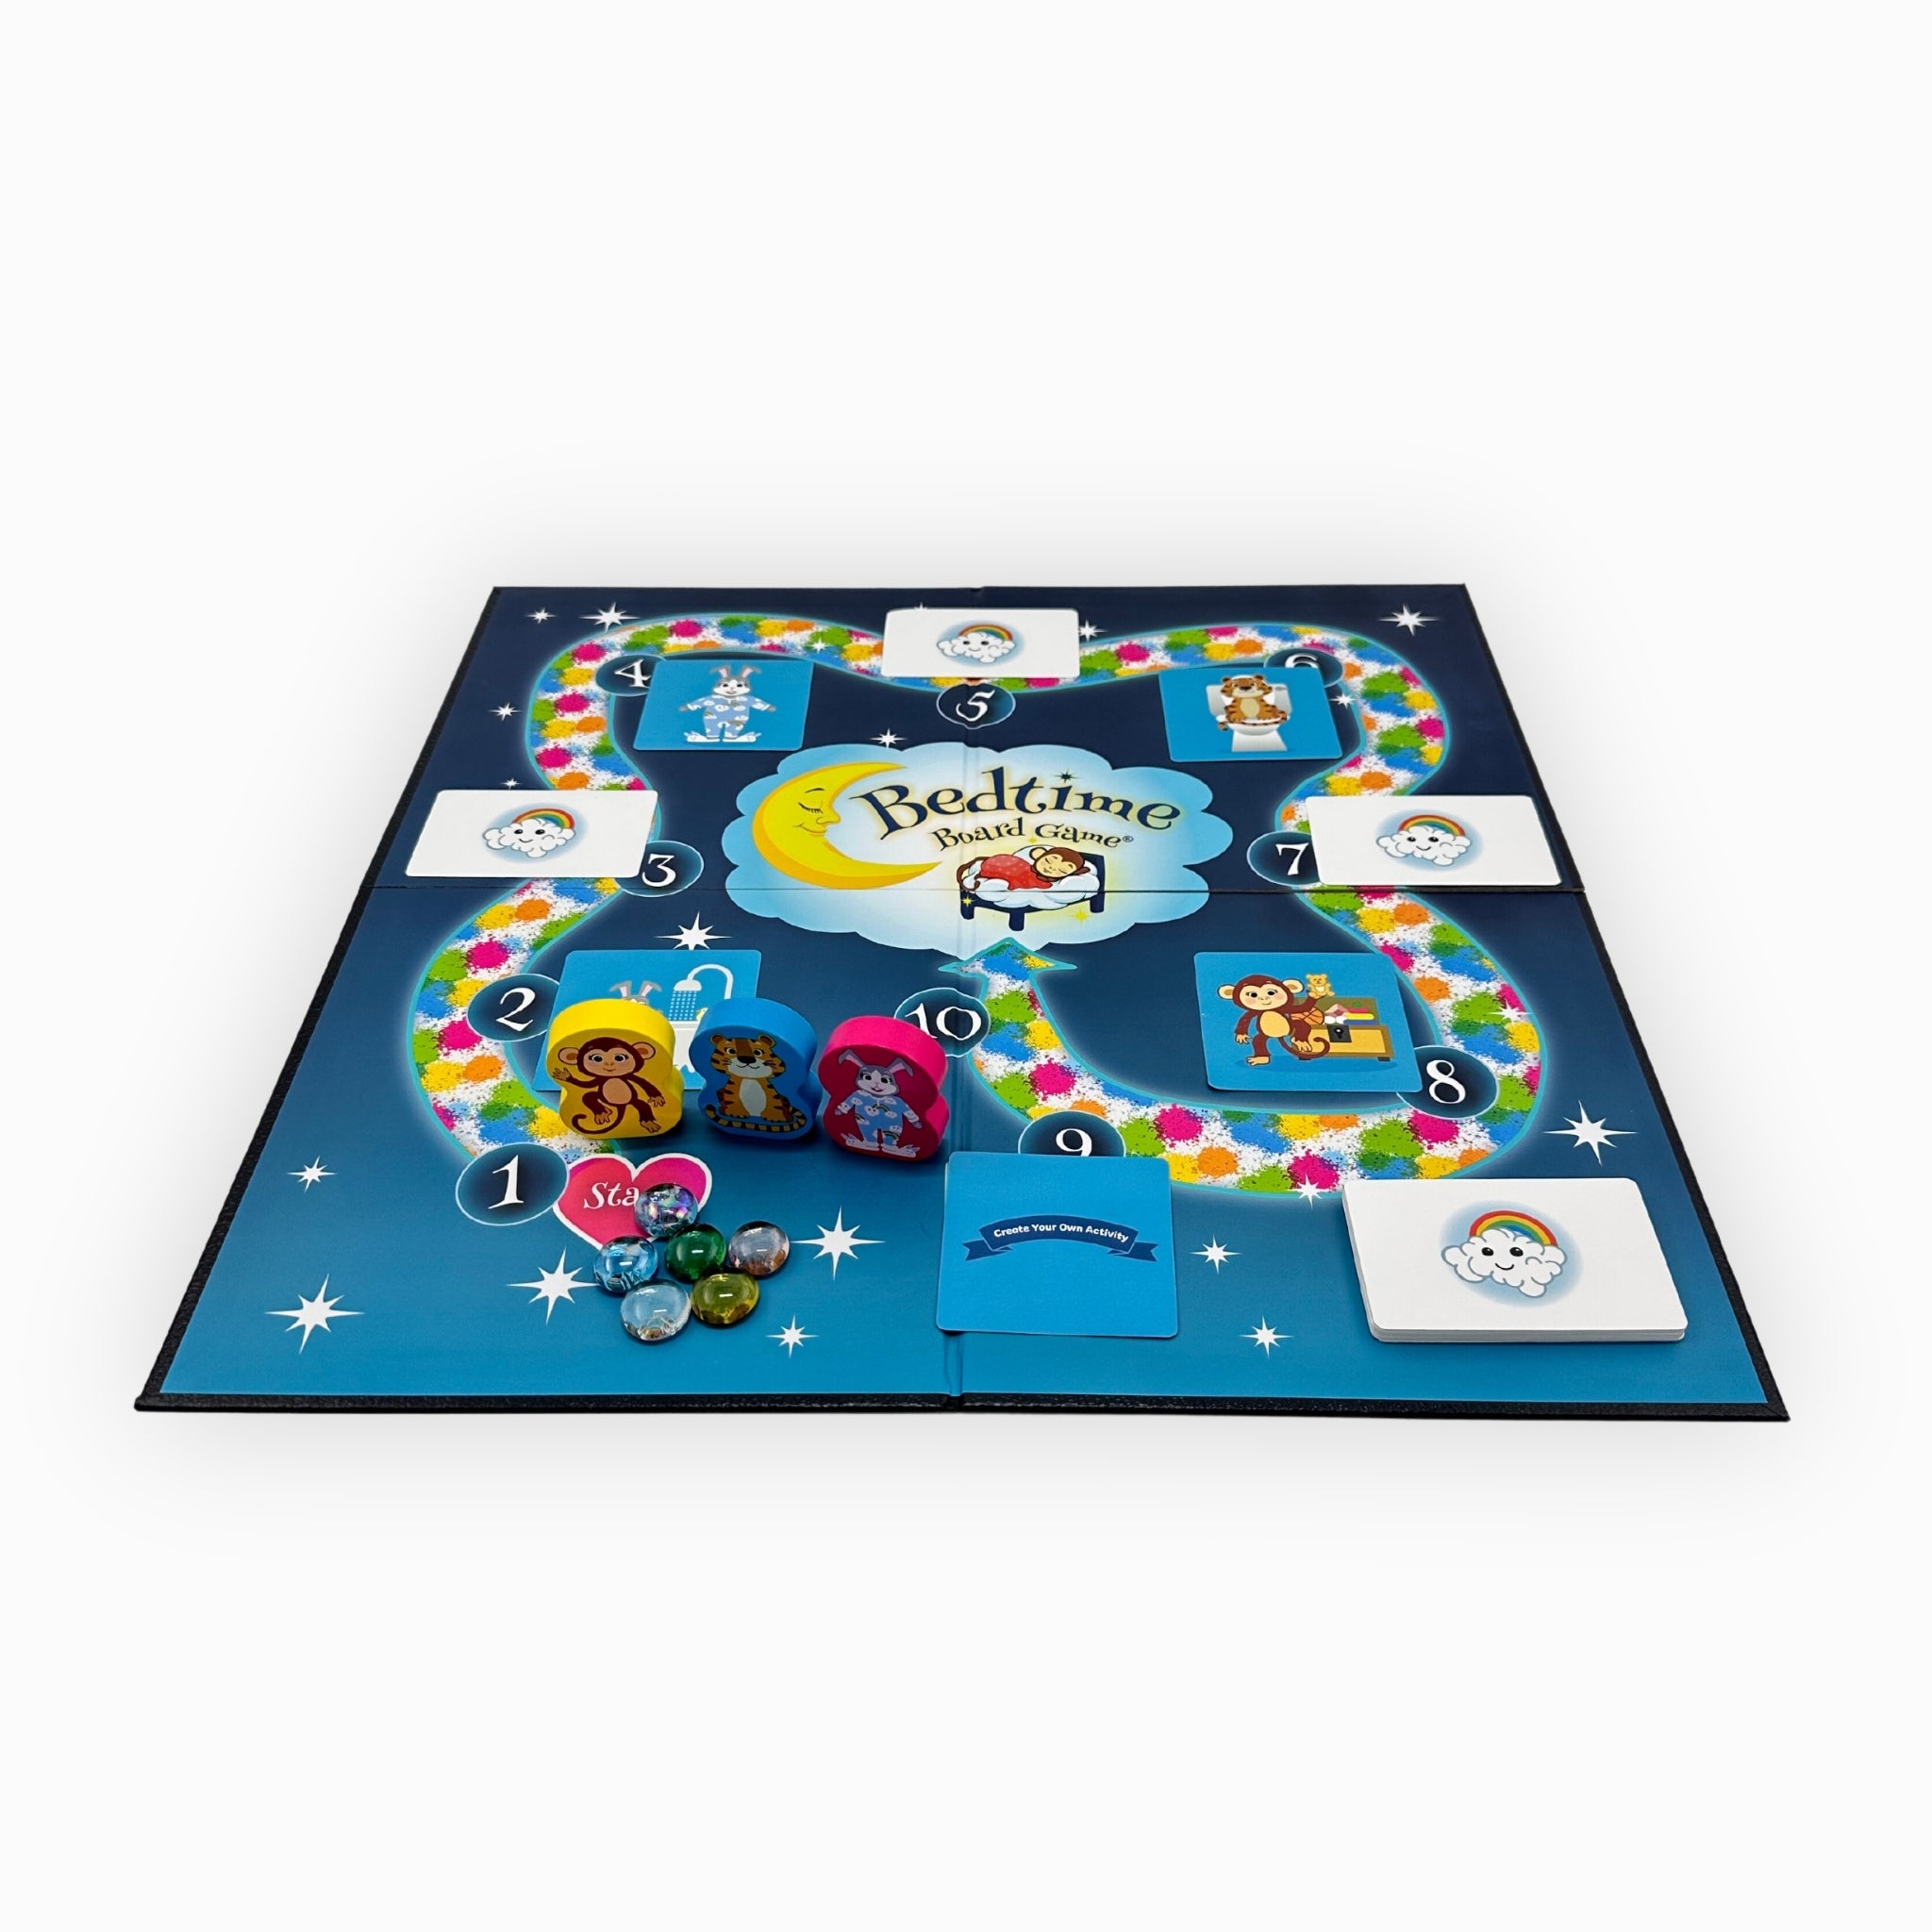 The Bedtime Board Game